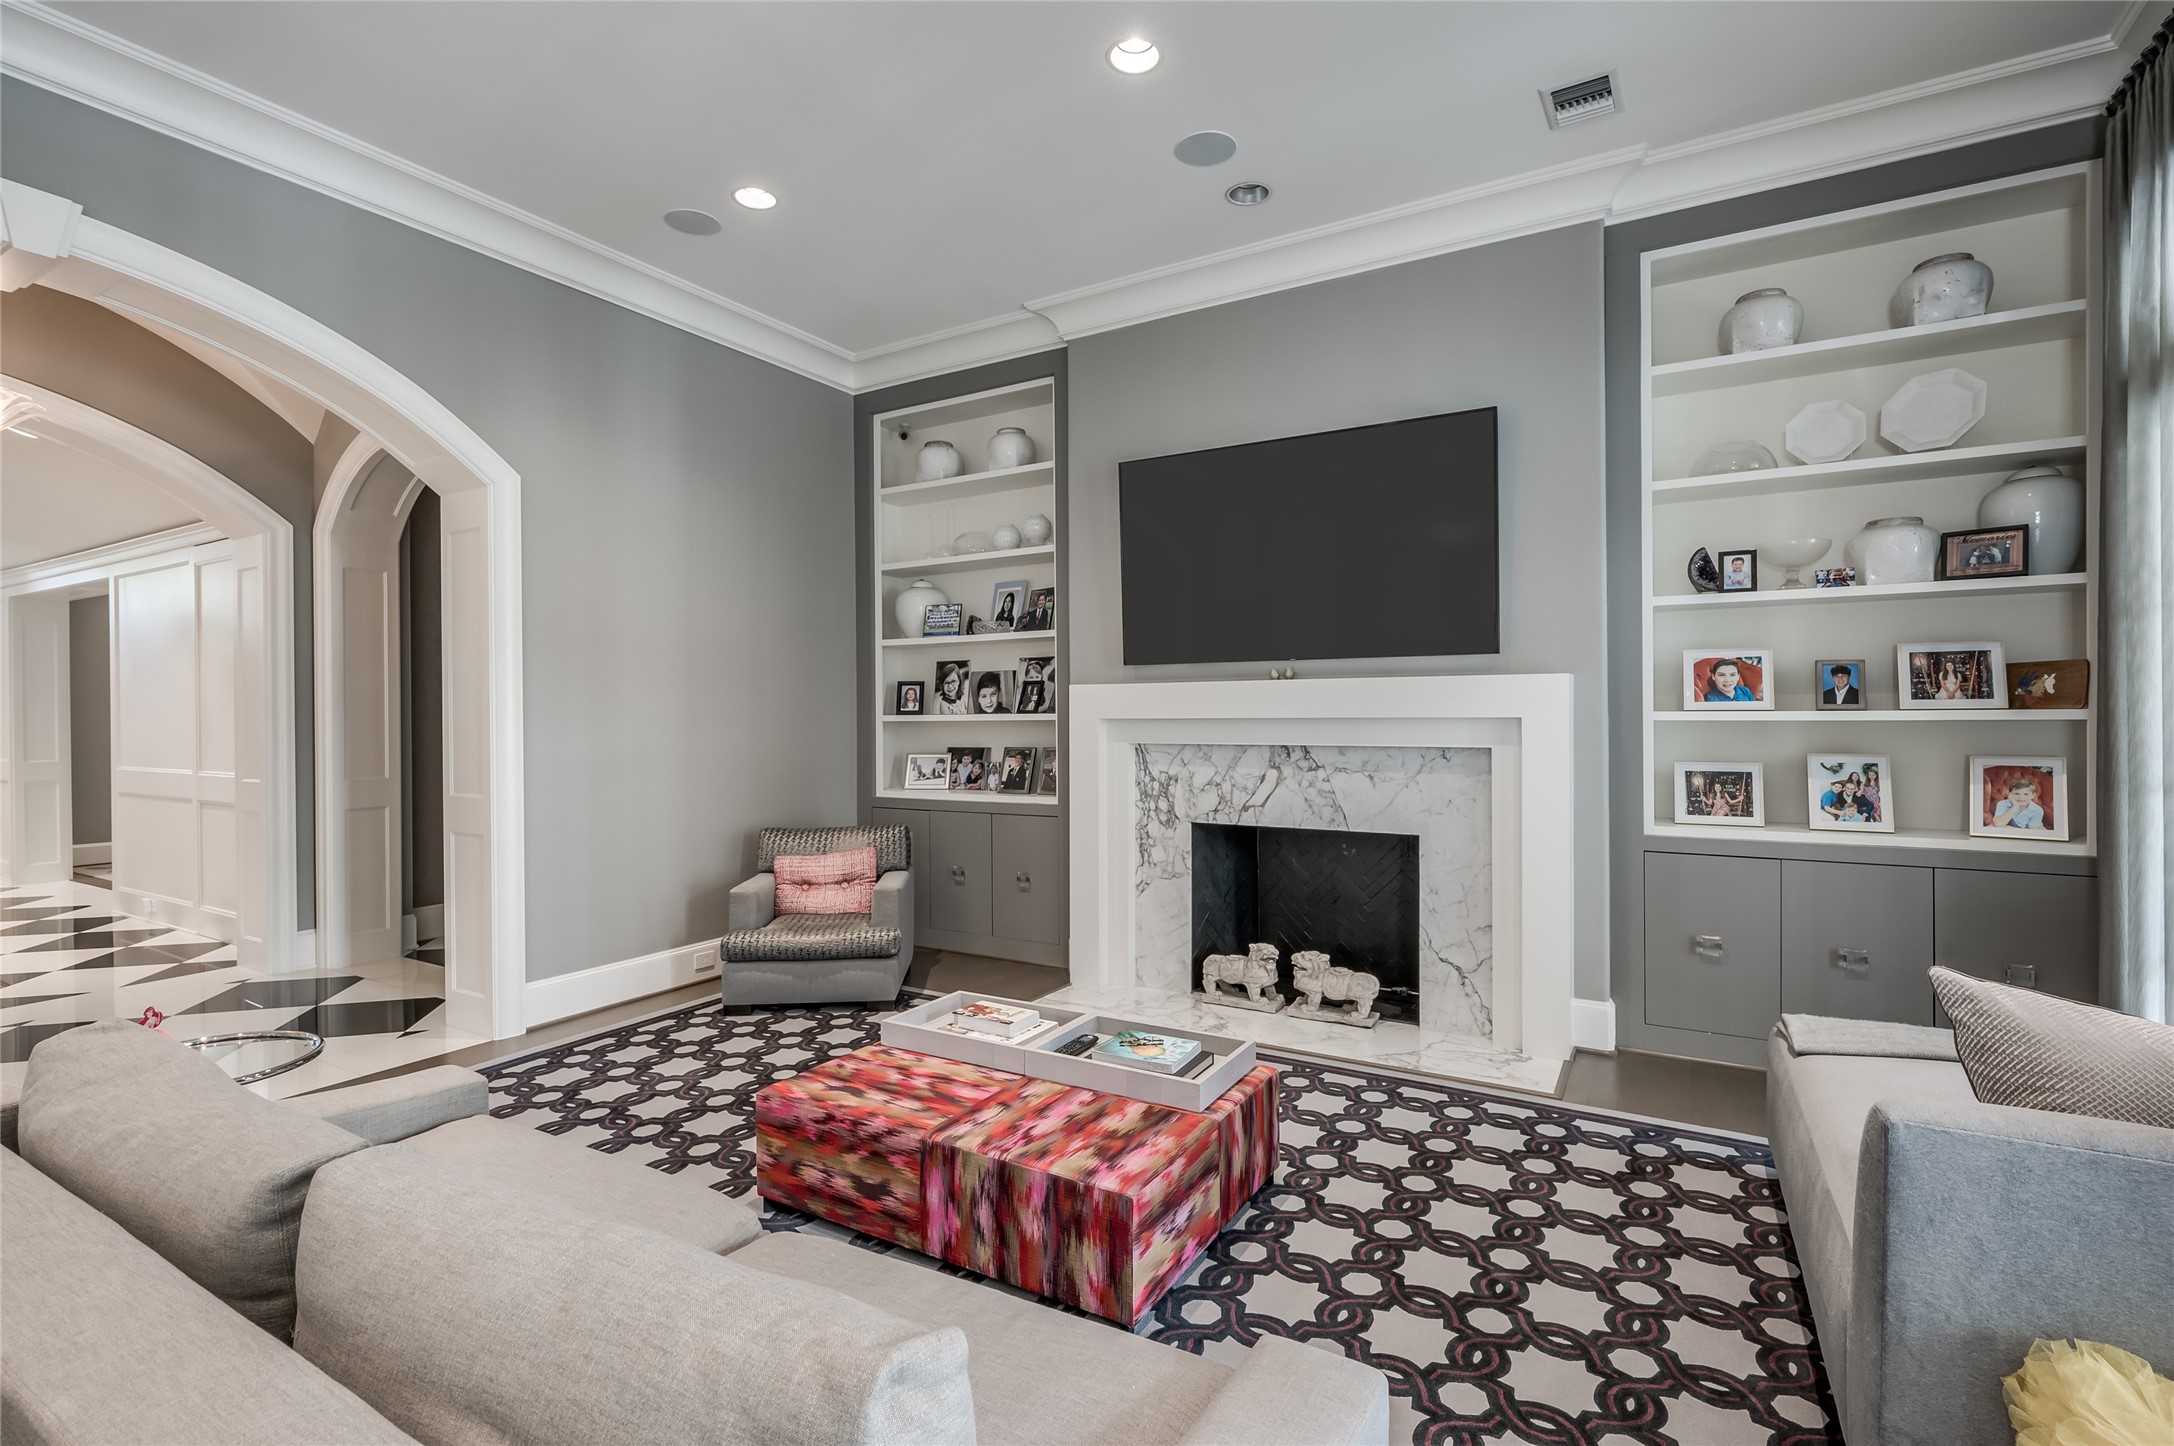 [Family Room]
Floor-to-ceiling book and storage cabinets flank the fireplace with marble surround and hearth. Center hall from foyer is shown at left.